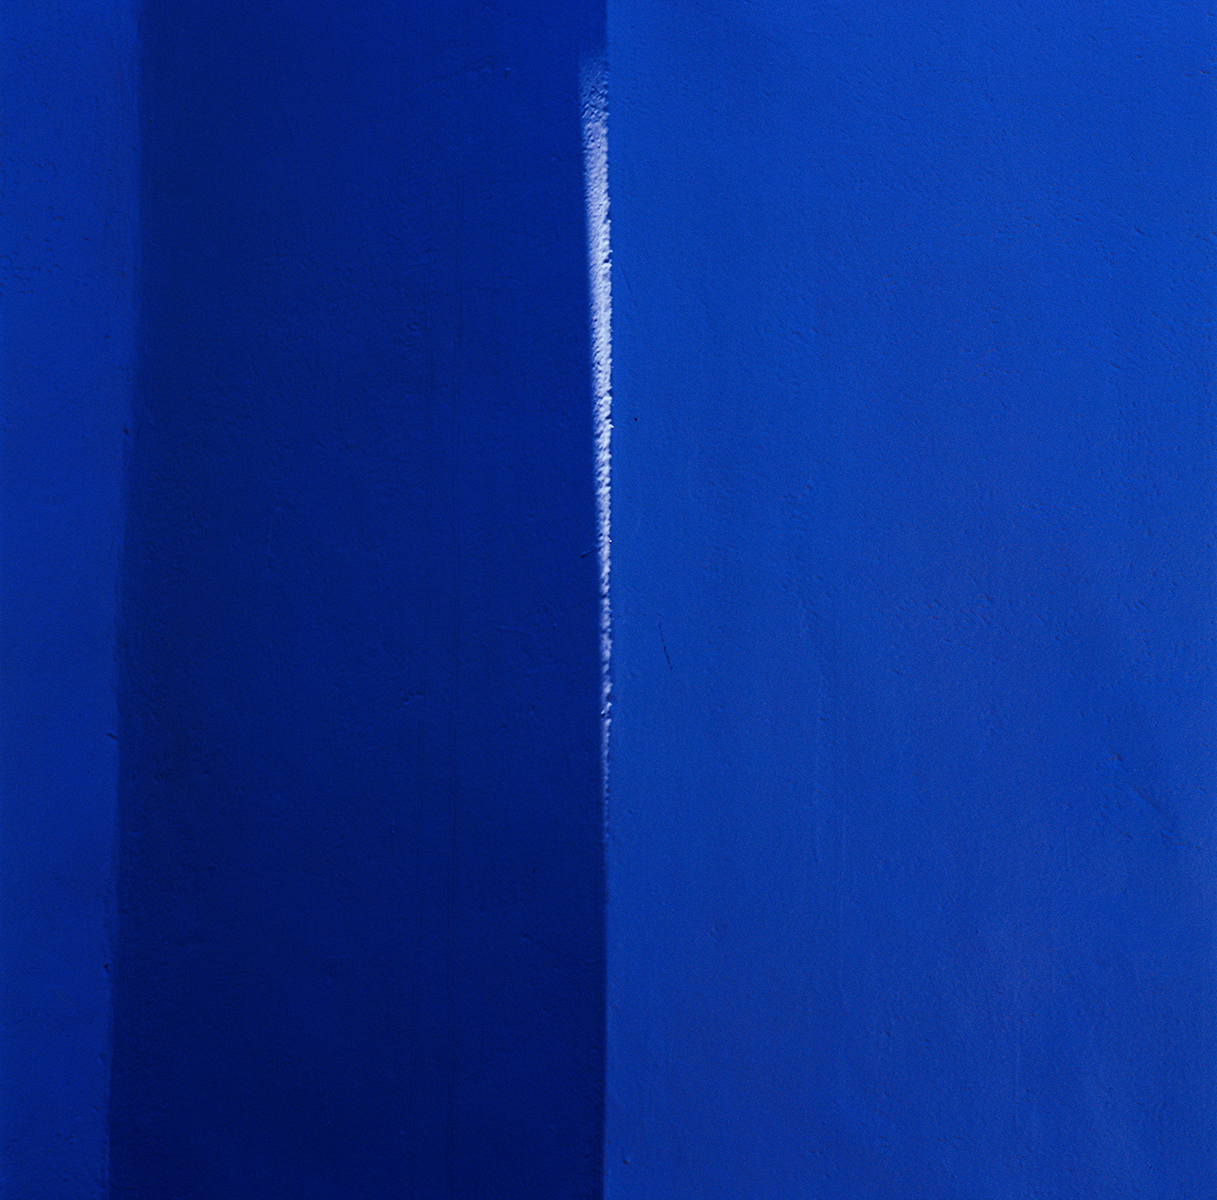 Blue abstraction